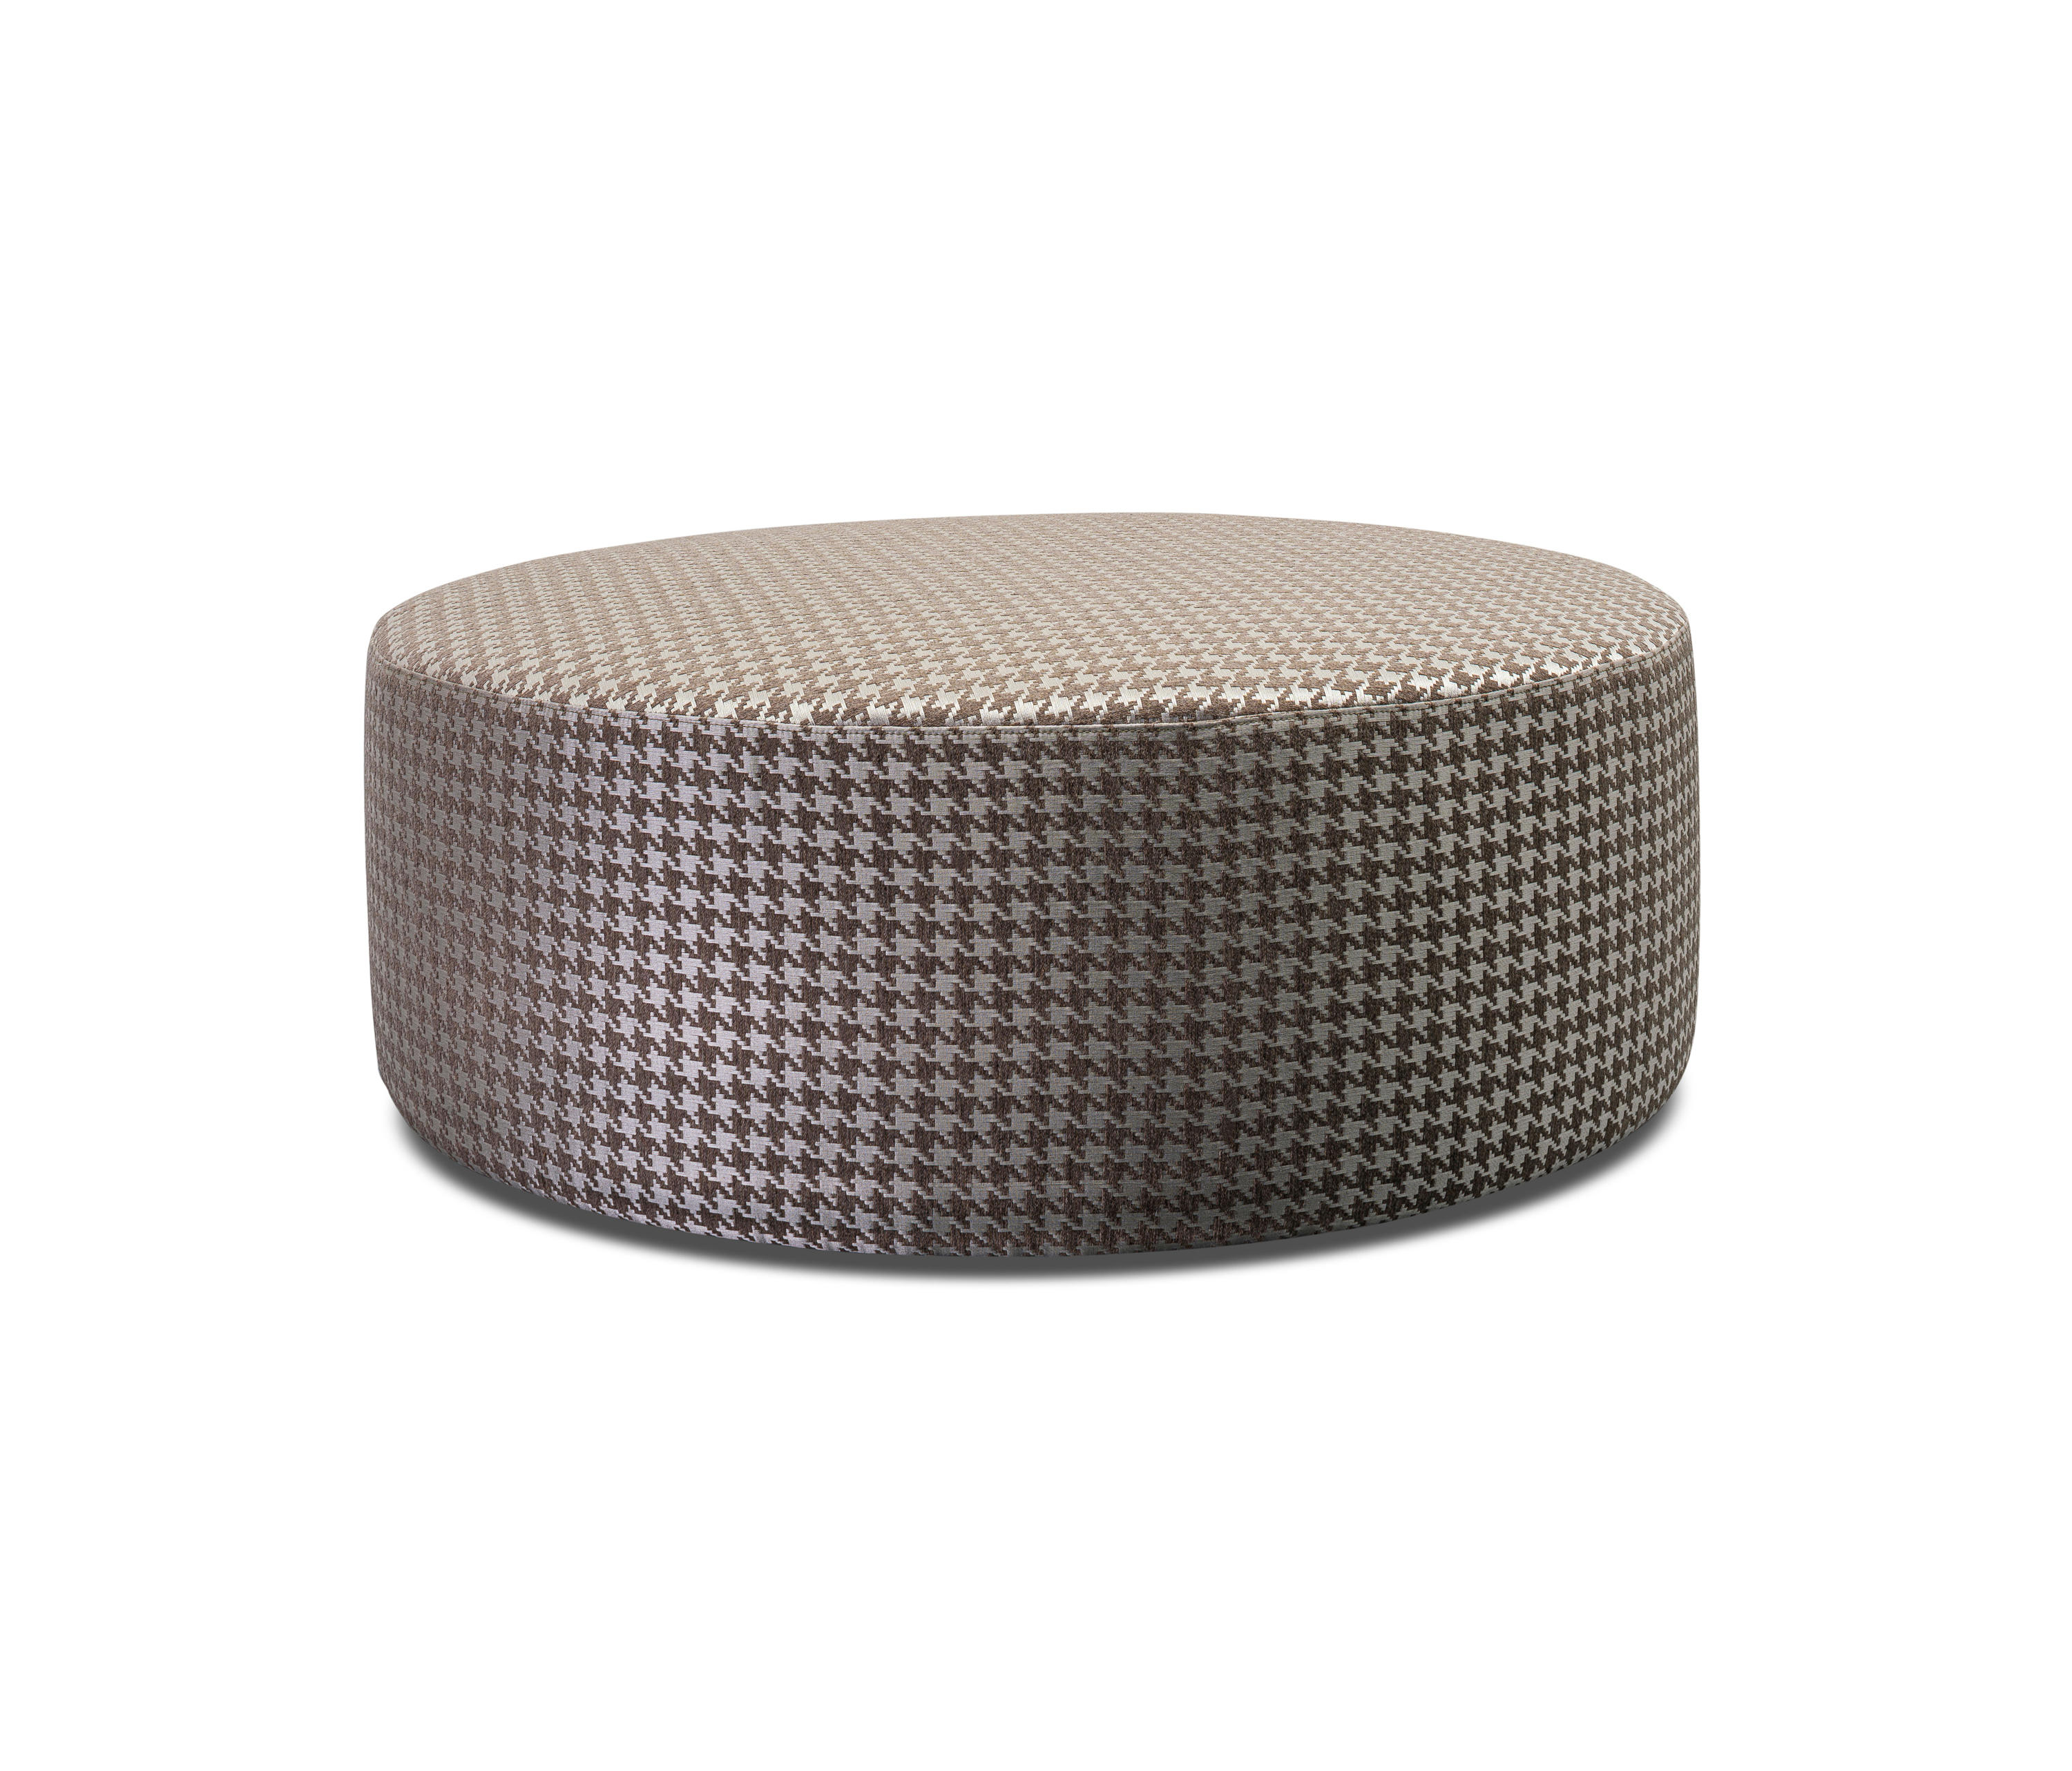 MONZA ROUND - Poufs from MACAZZ LIVING INTERIORS | Architonic